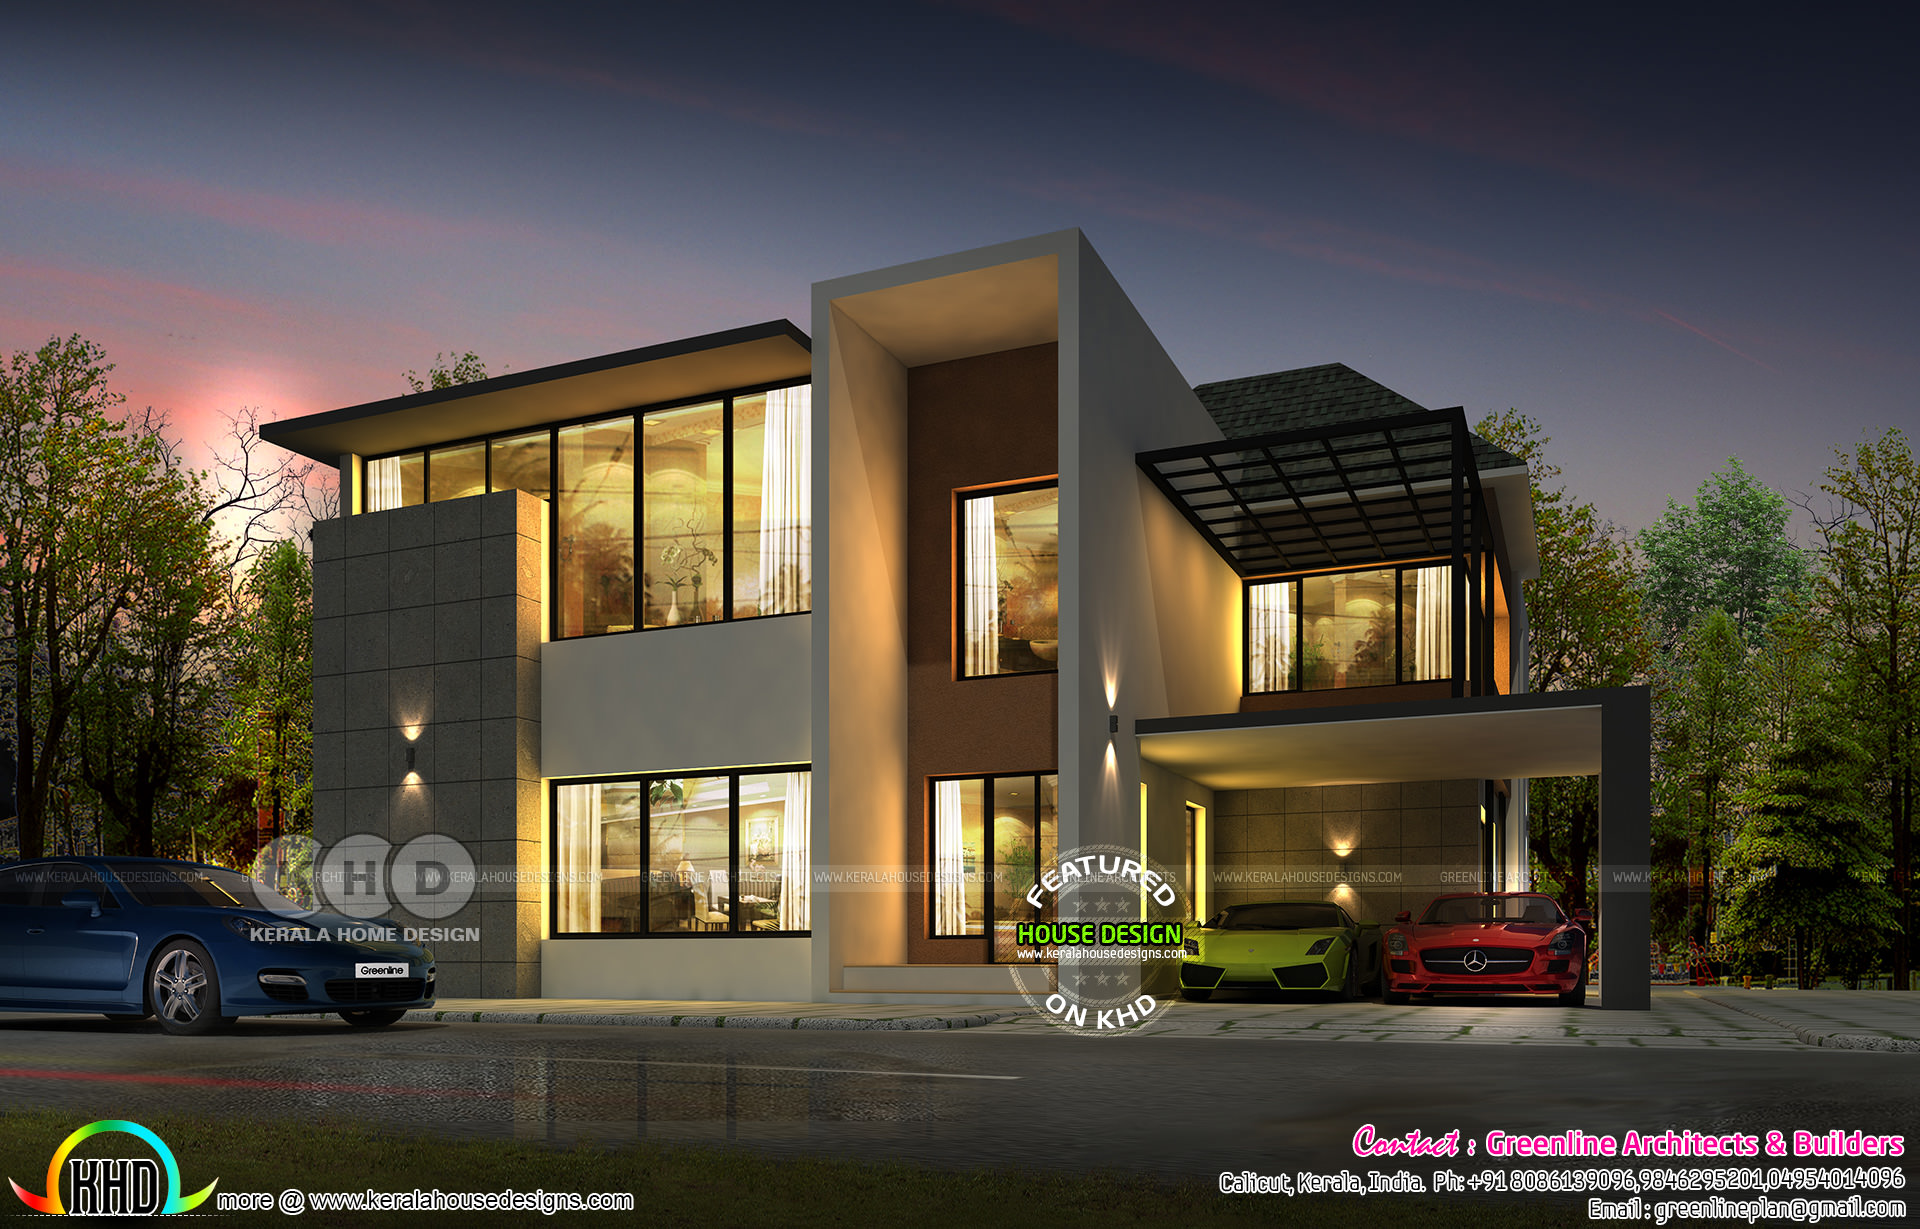 4 BHK ultra modern contemporary home plan - Kerala home design and